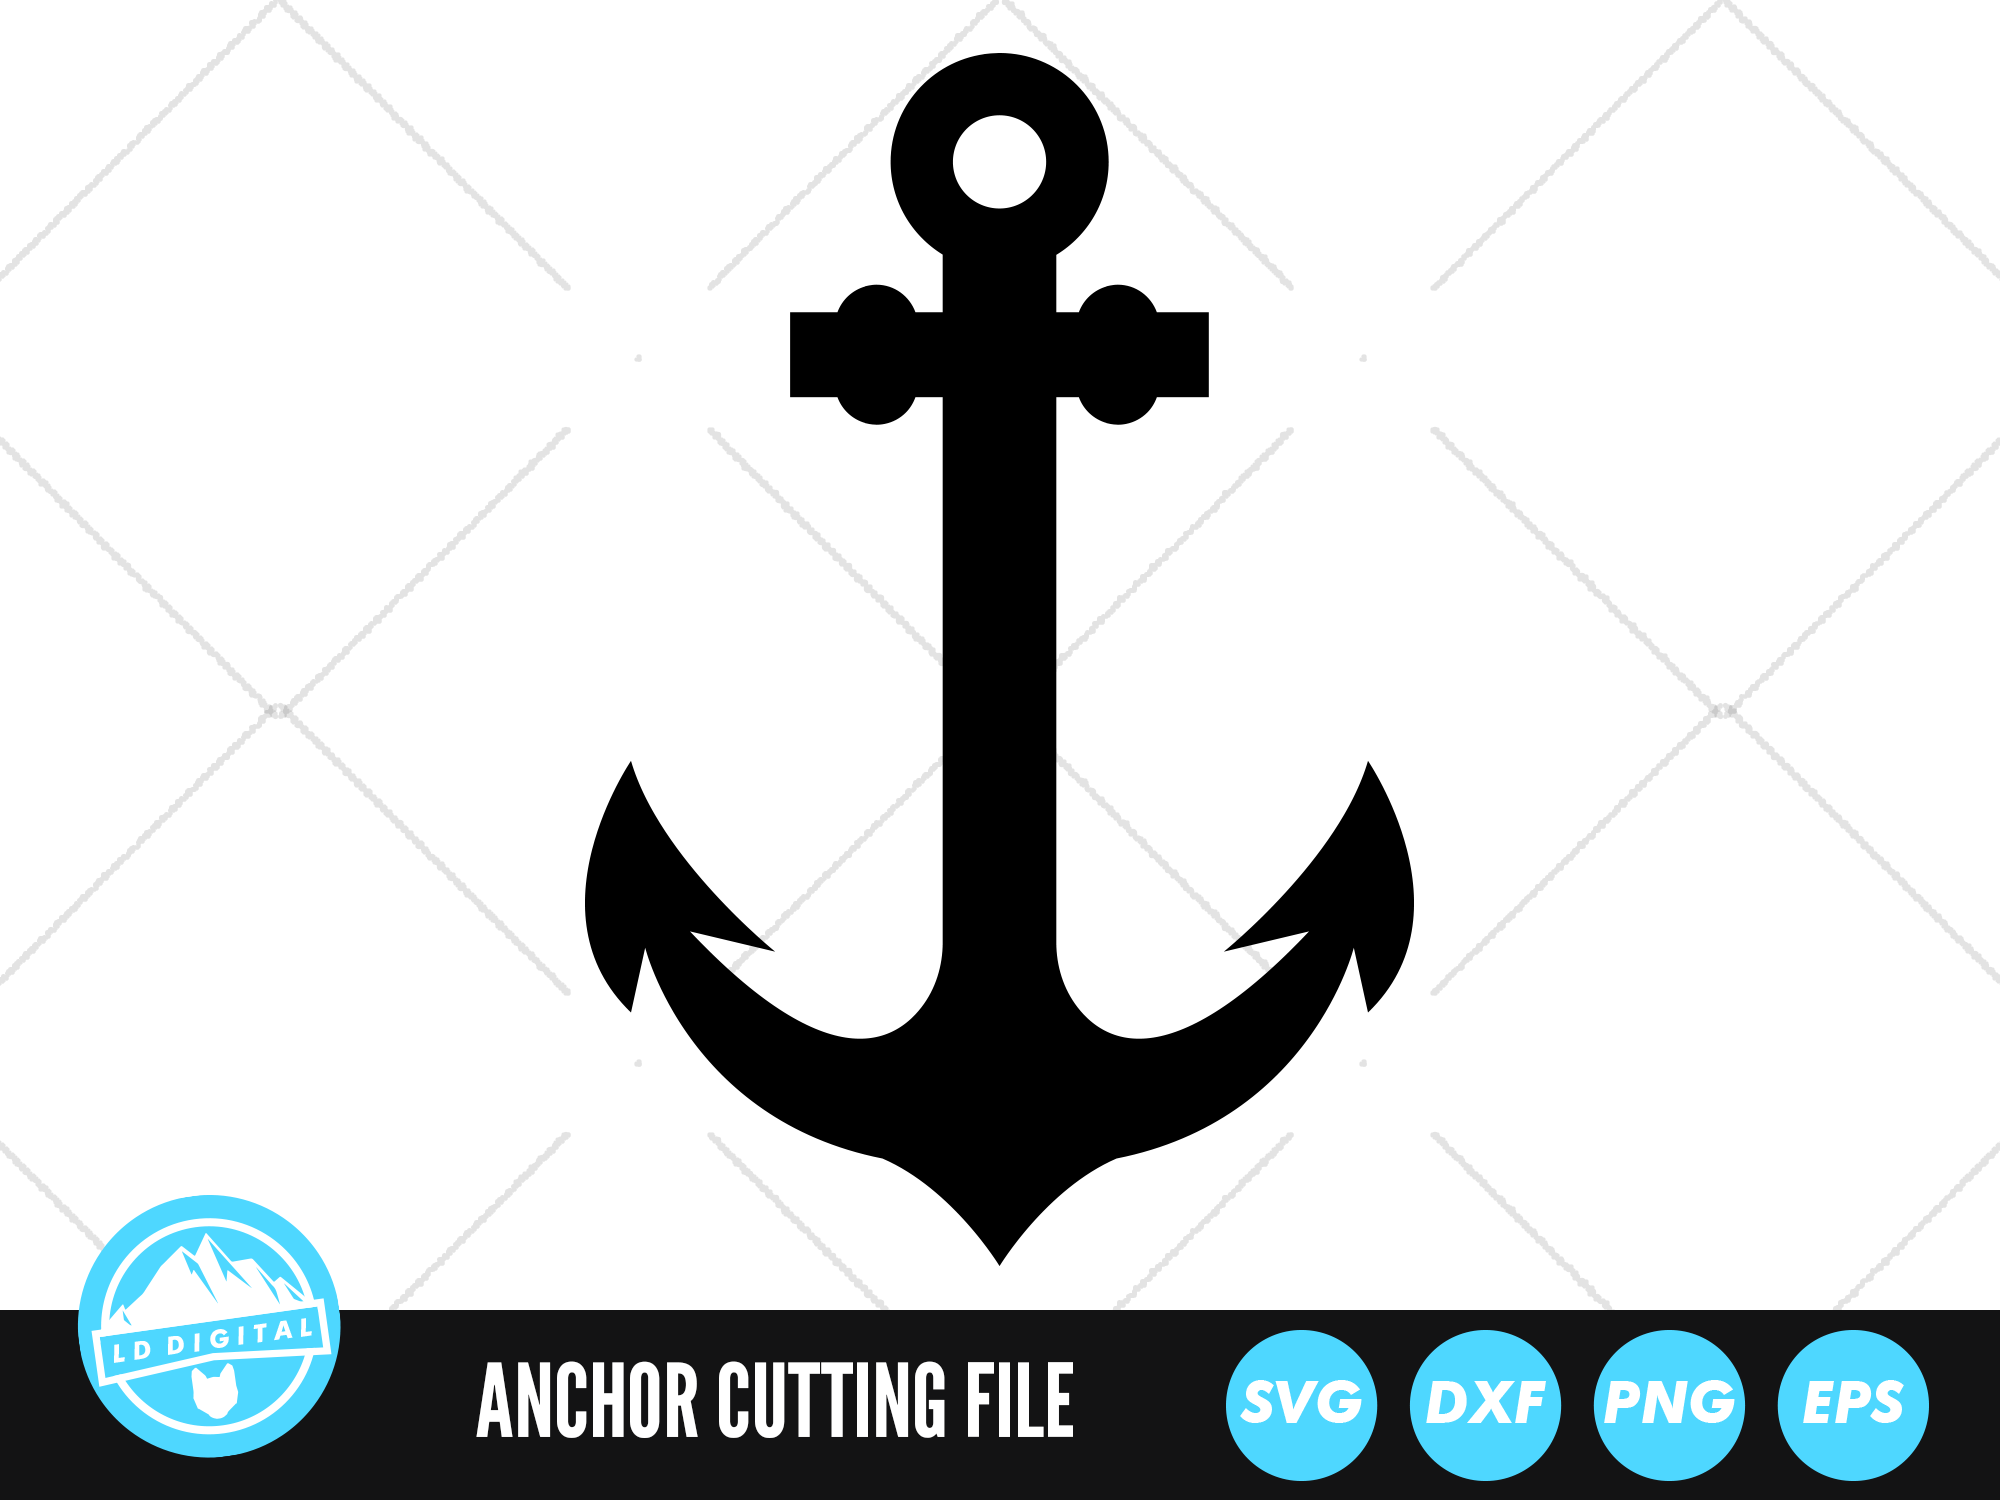 Download Clipart Anchor Dxf Anchor Silhouette Svgs For Cricut Silhouette Files Vector Files Anchor Svg For Silhouette Cameo Anchor Vector Fabric Craft Supplies Tools Delage Com Br